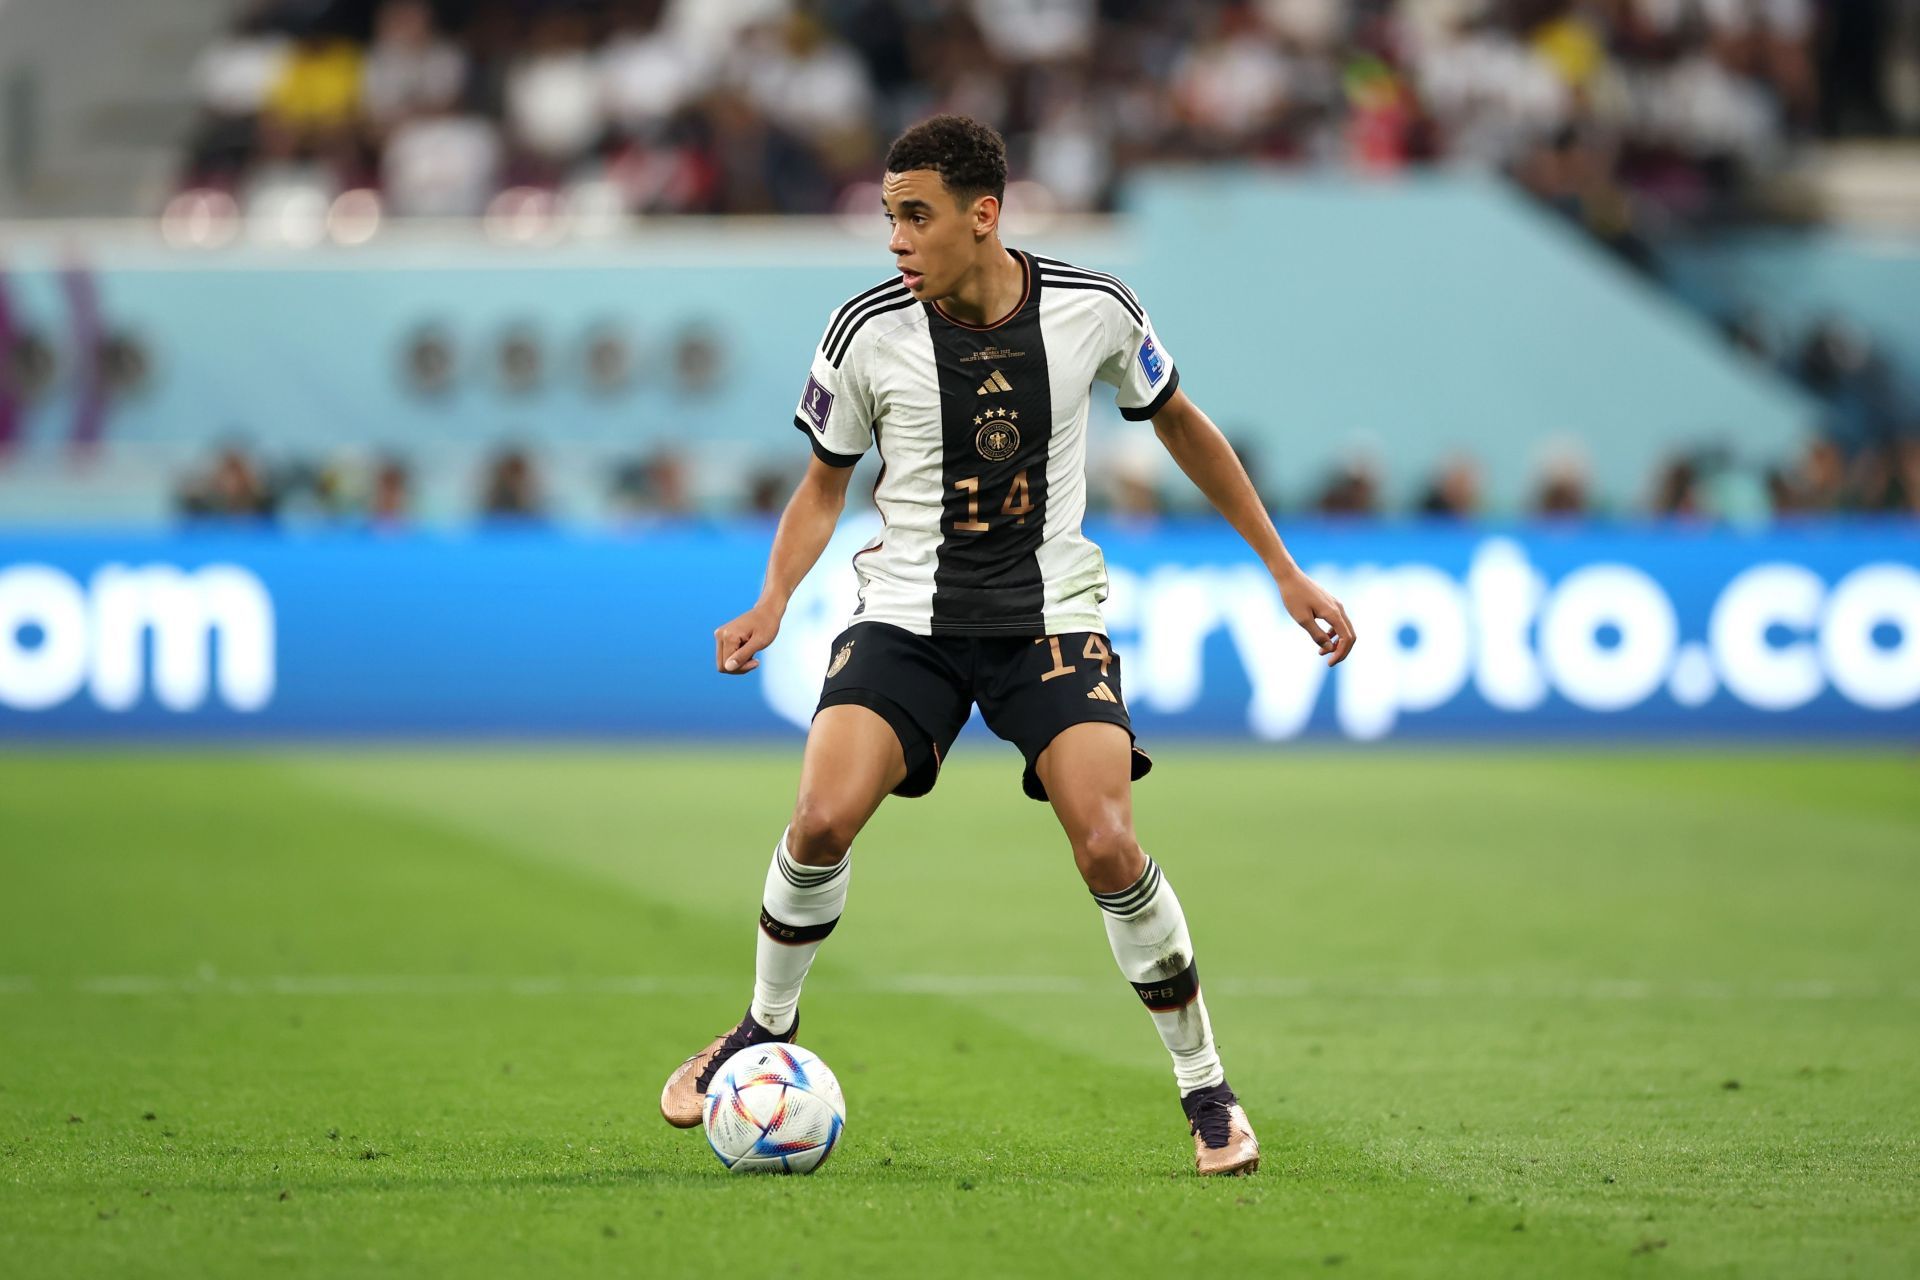 Jamal Musiala in action for Germany during their 2022 FIFA World Cup opener versus Japan in Qatar.